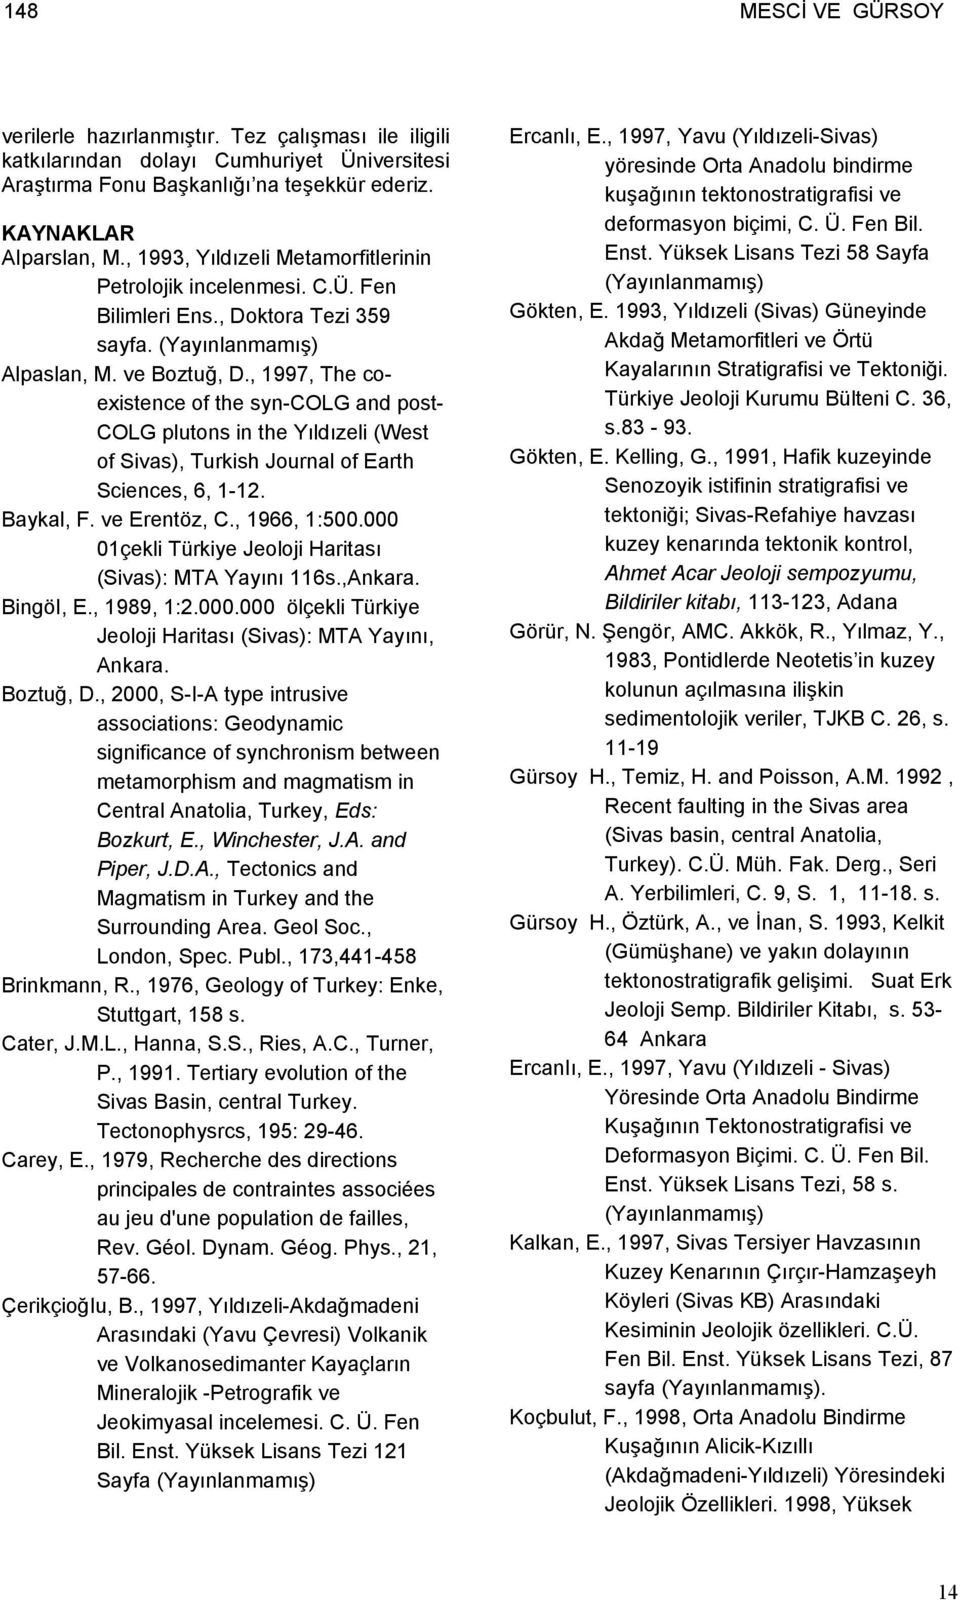 , 1997, The coexistence of the syn-colg and post- COLG plutons in the Yıldızeli (West of Sivas), Turkish Journal of Earth Sciences, 6, 1-12. Baykal, F. ve Erentöz, C., 1966, 1:500.